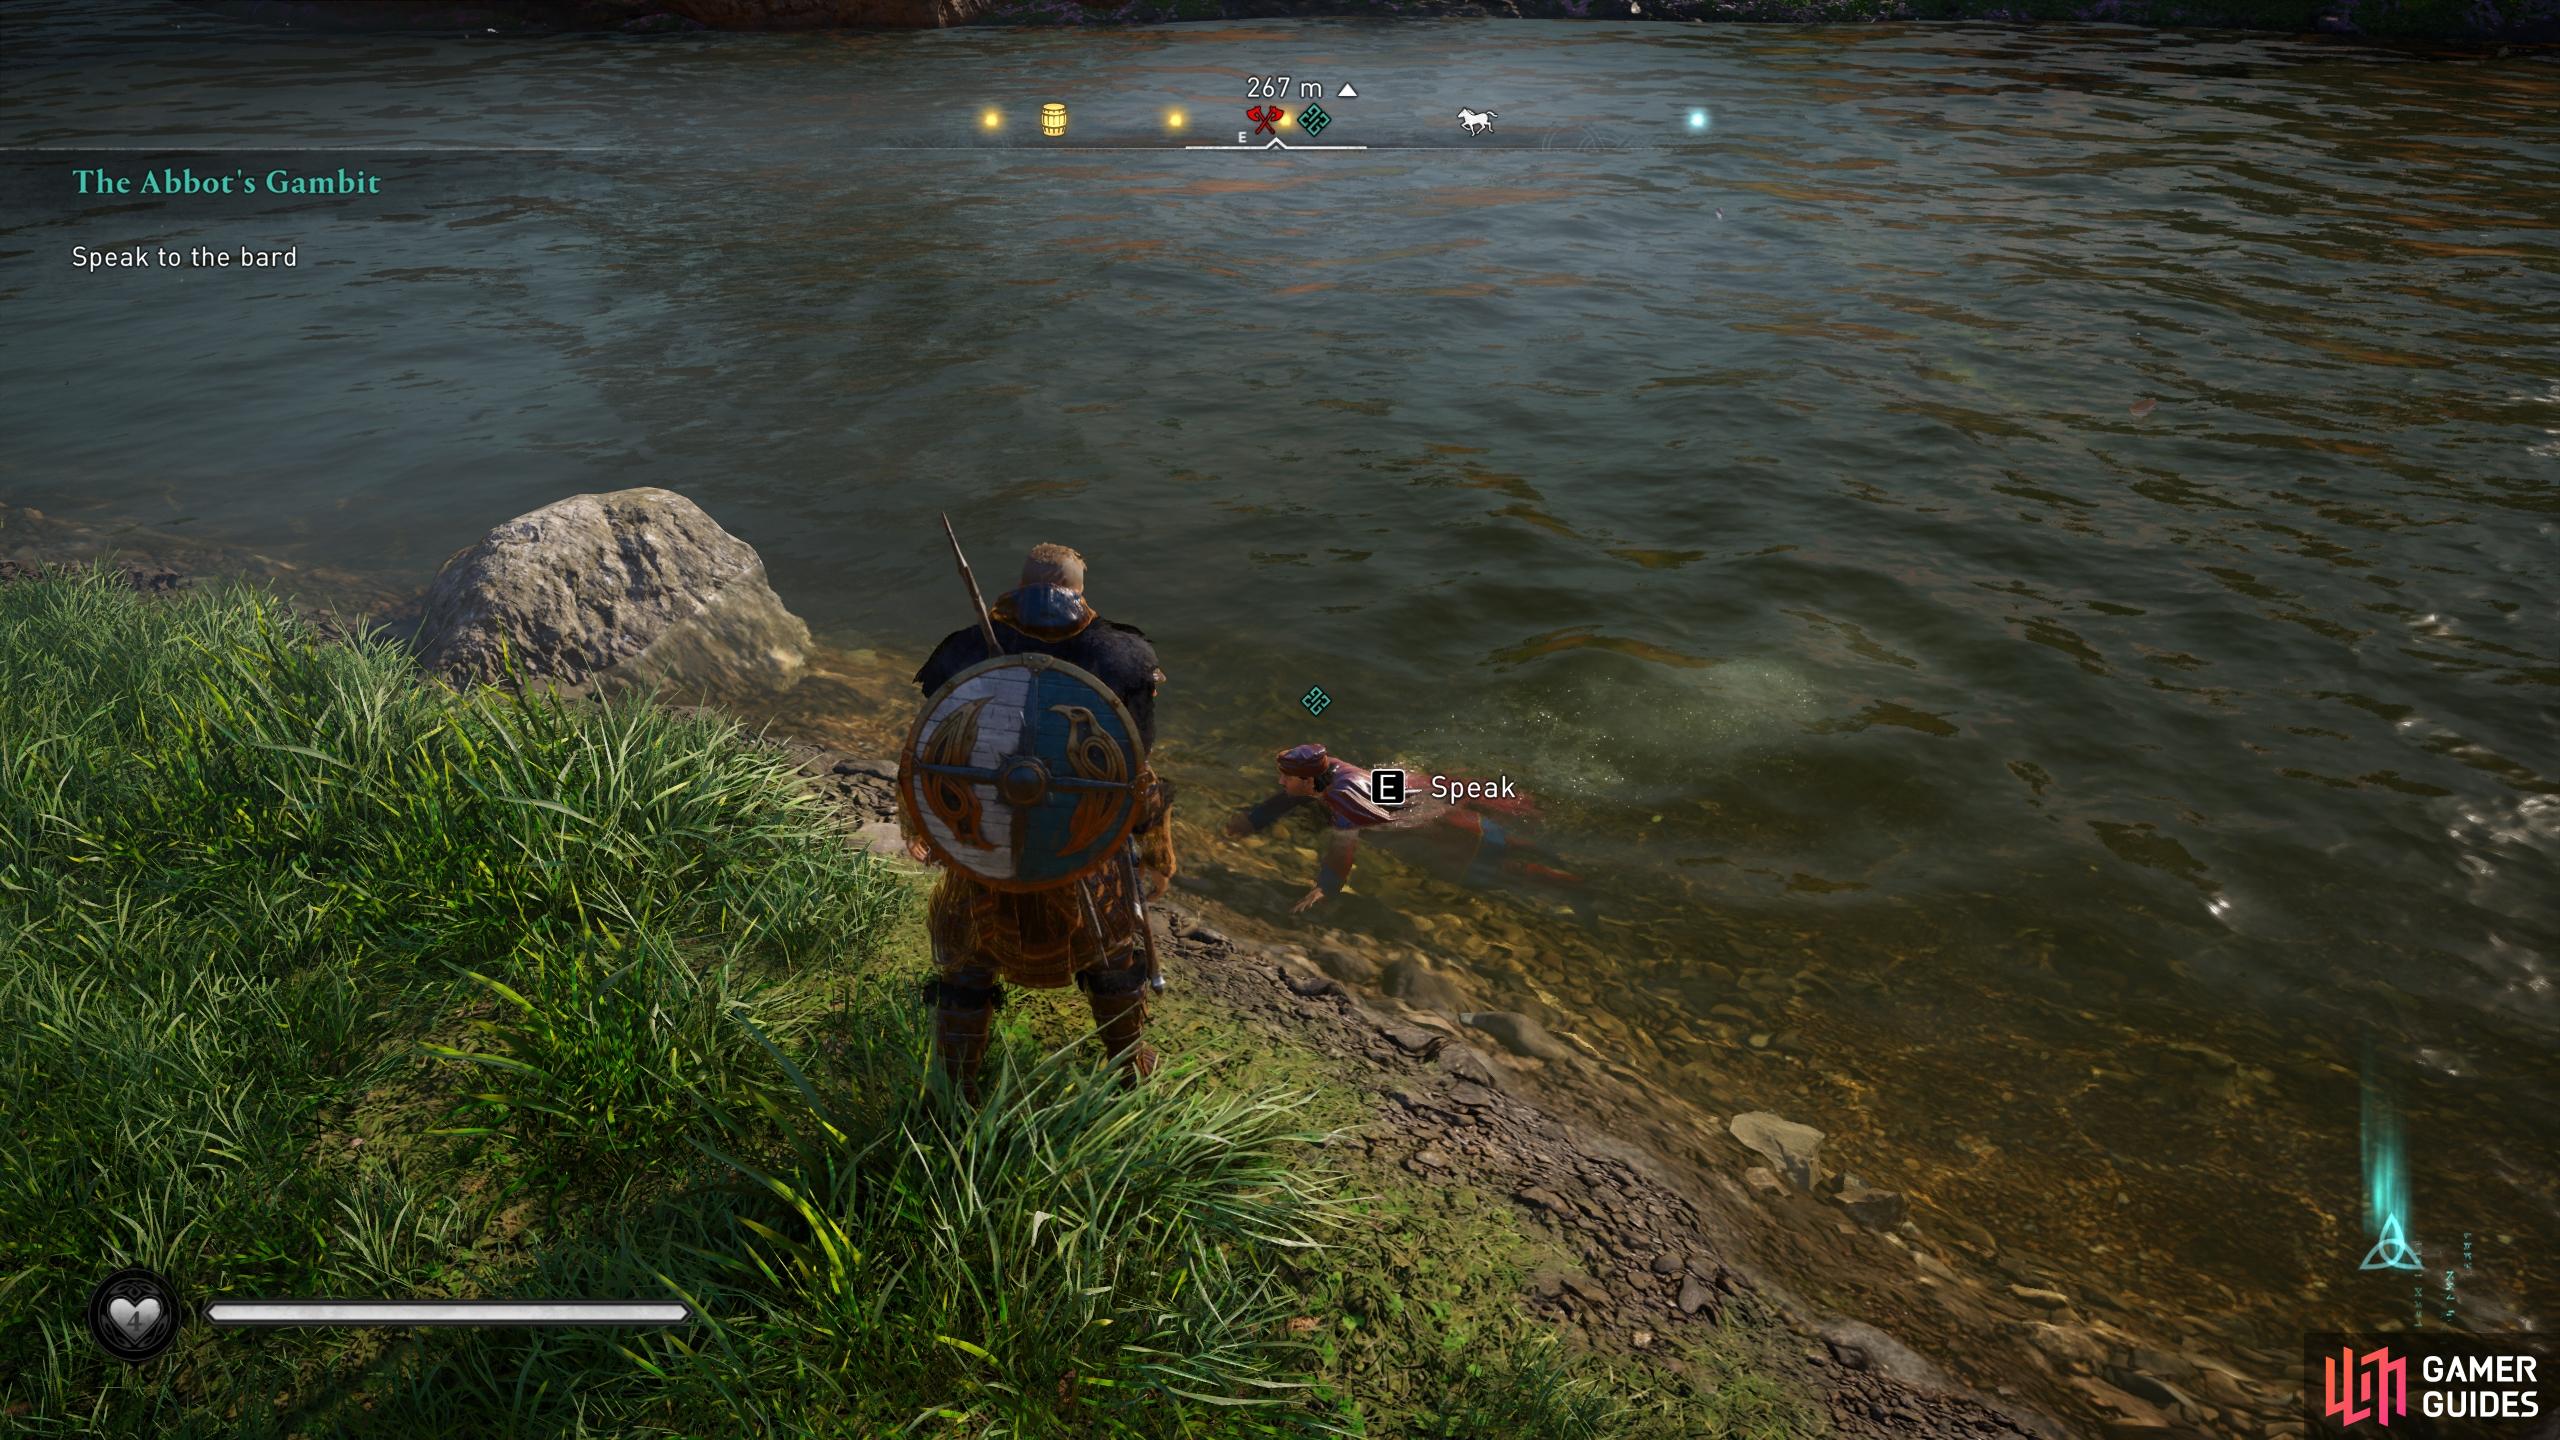 Once you've thrown the bard in the river, you'll be able to speak with him.